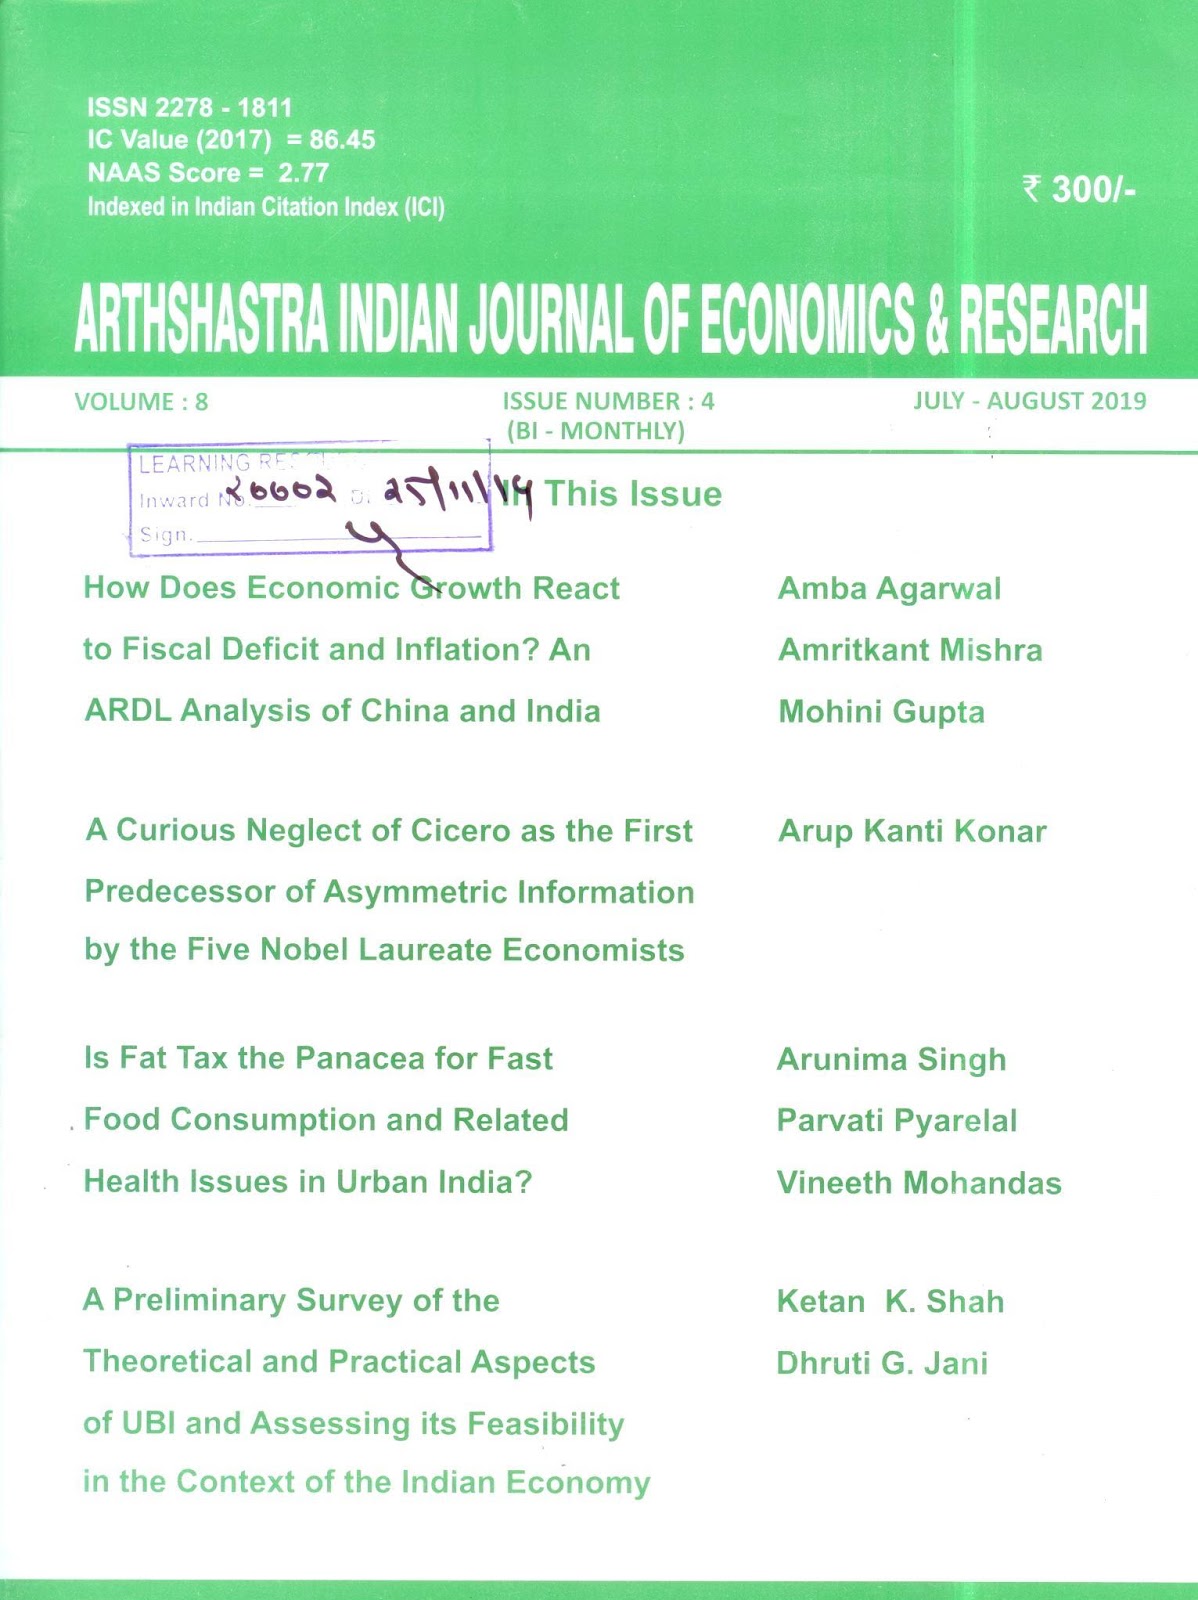 http://indianjournalofeconomicsandresearch.com/index.php/aijer/issue/view/8678